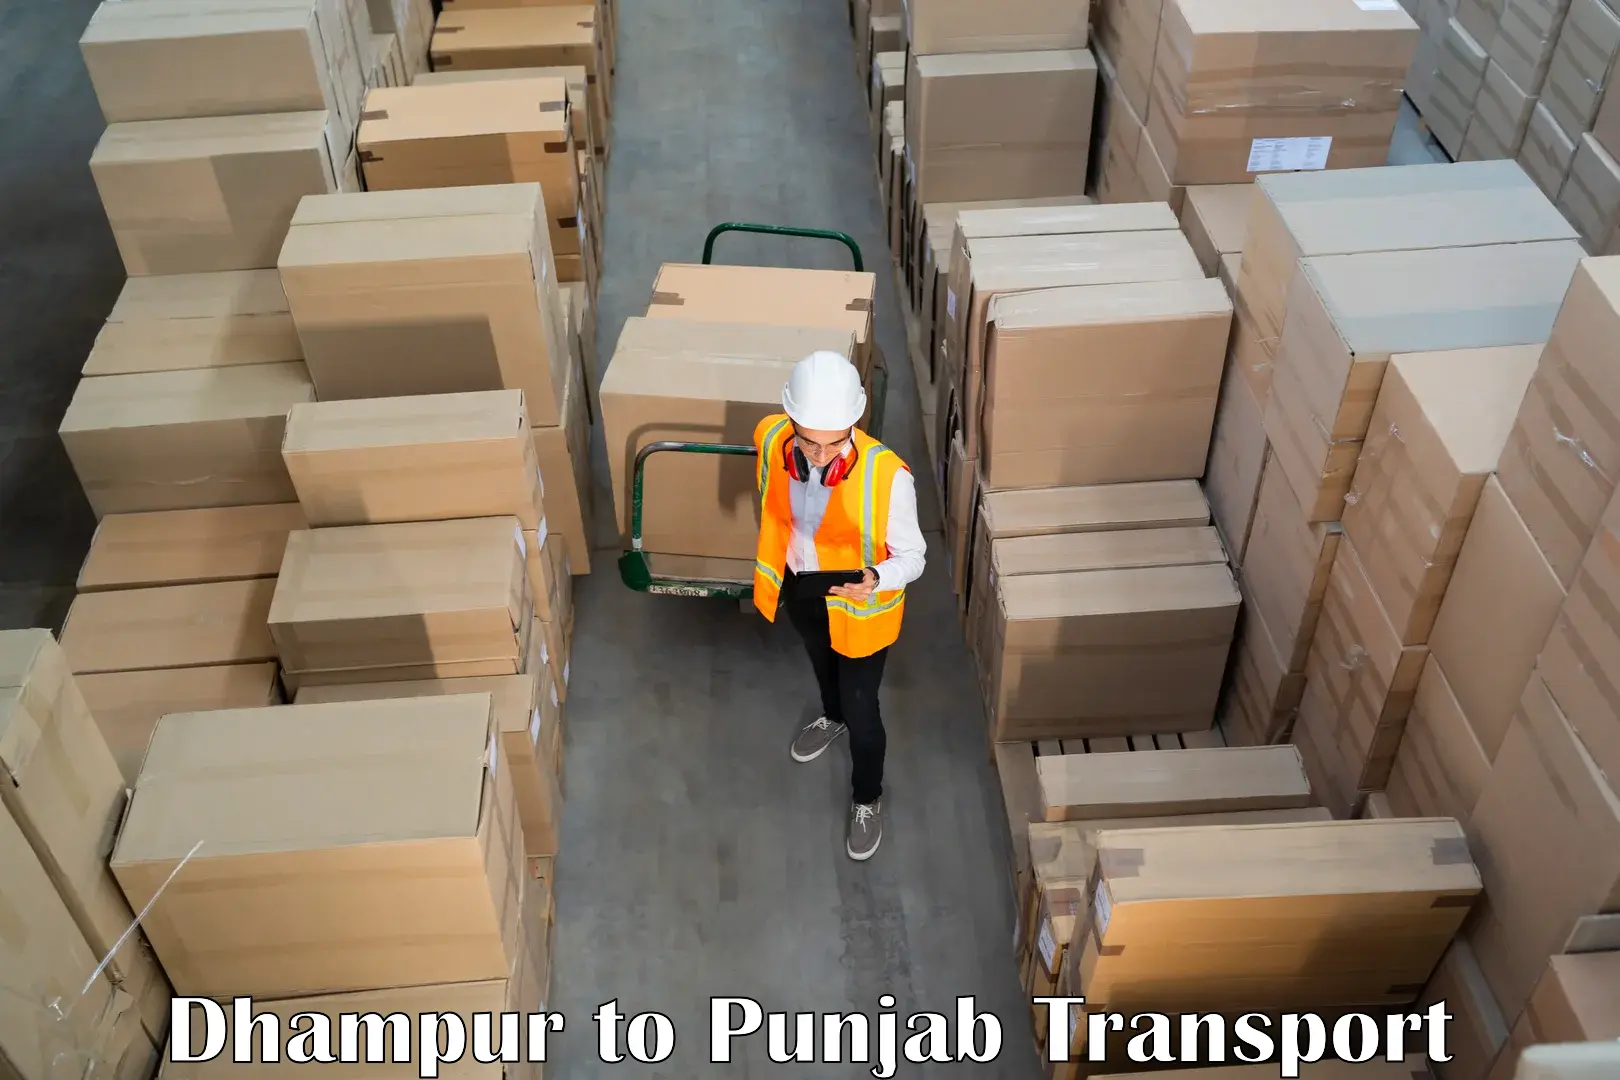 Road transport services in Dhampur to Ludhiana